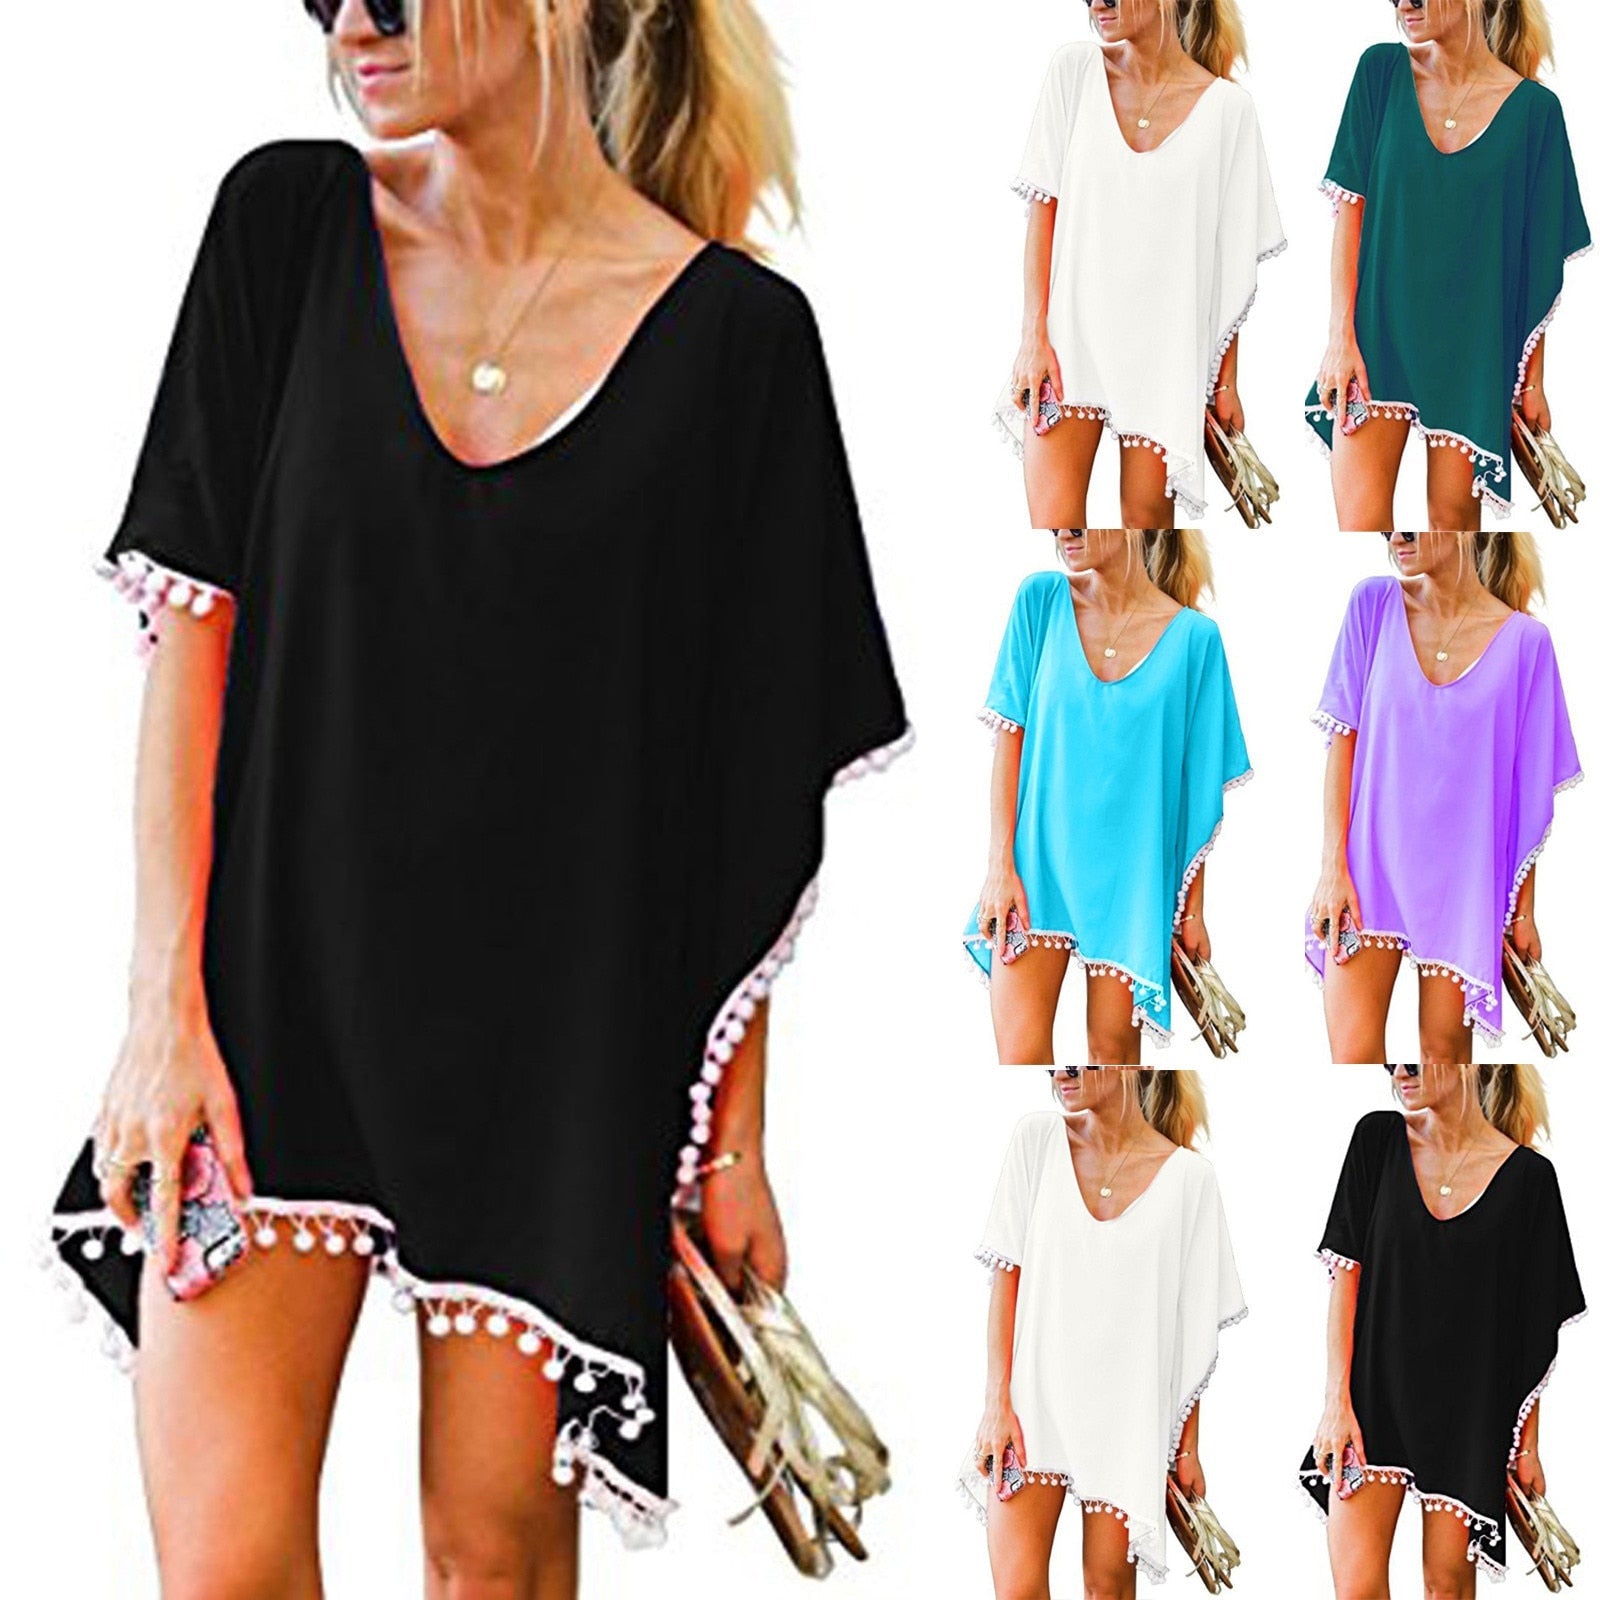 New Chiffon Tassels Beach Wear Swimsuit Cover Up Swimwear Bathing Suits Summer Cover-Ups Loose Solid Pareo Cover Ups AMAIO